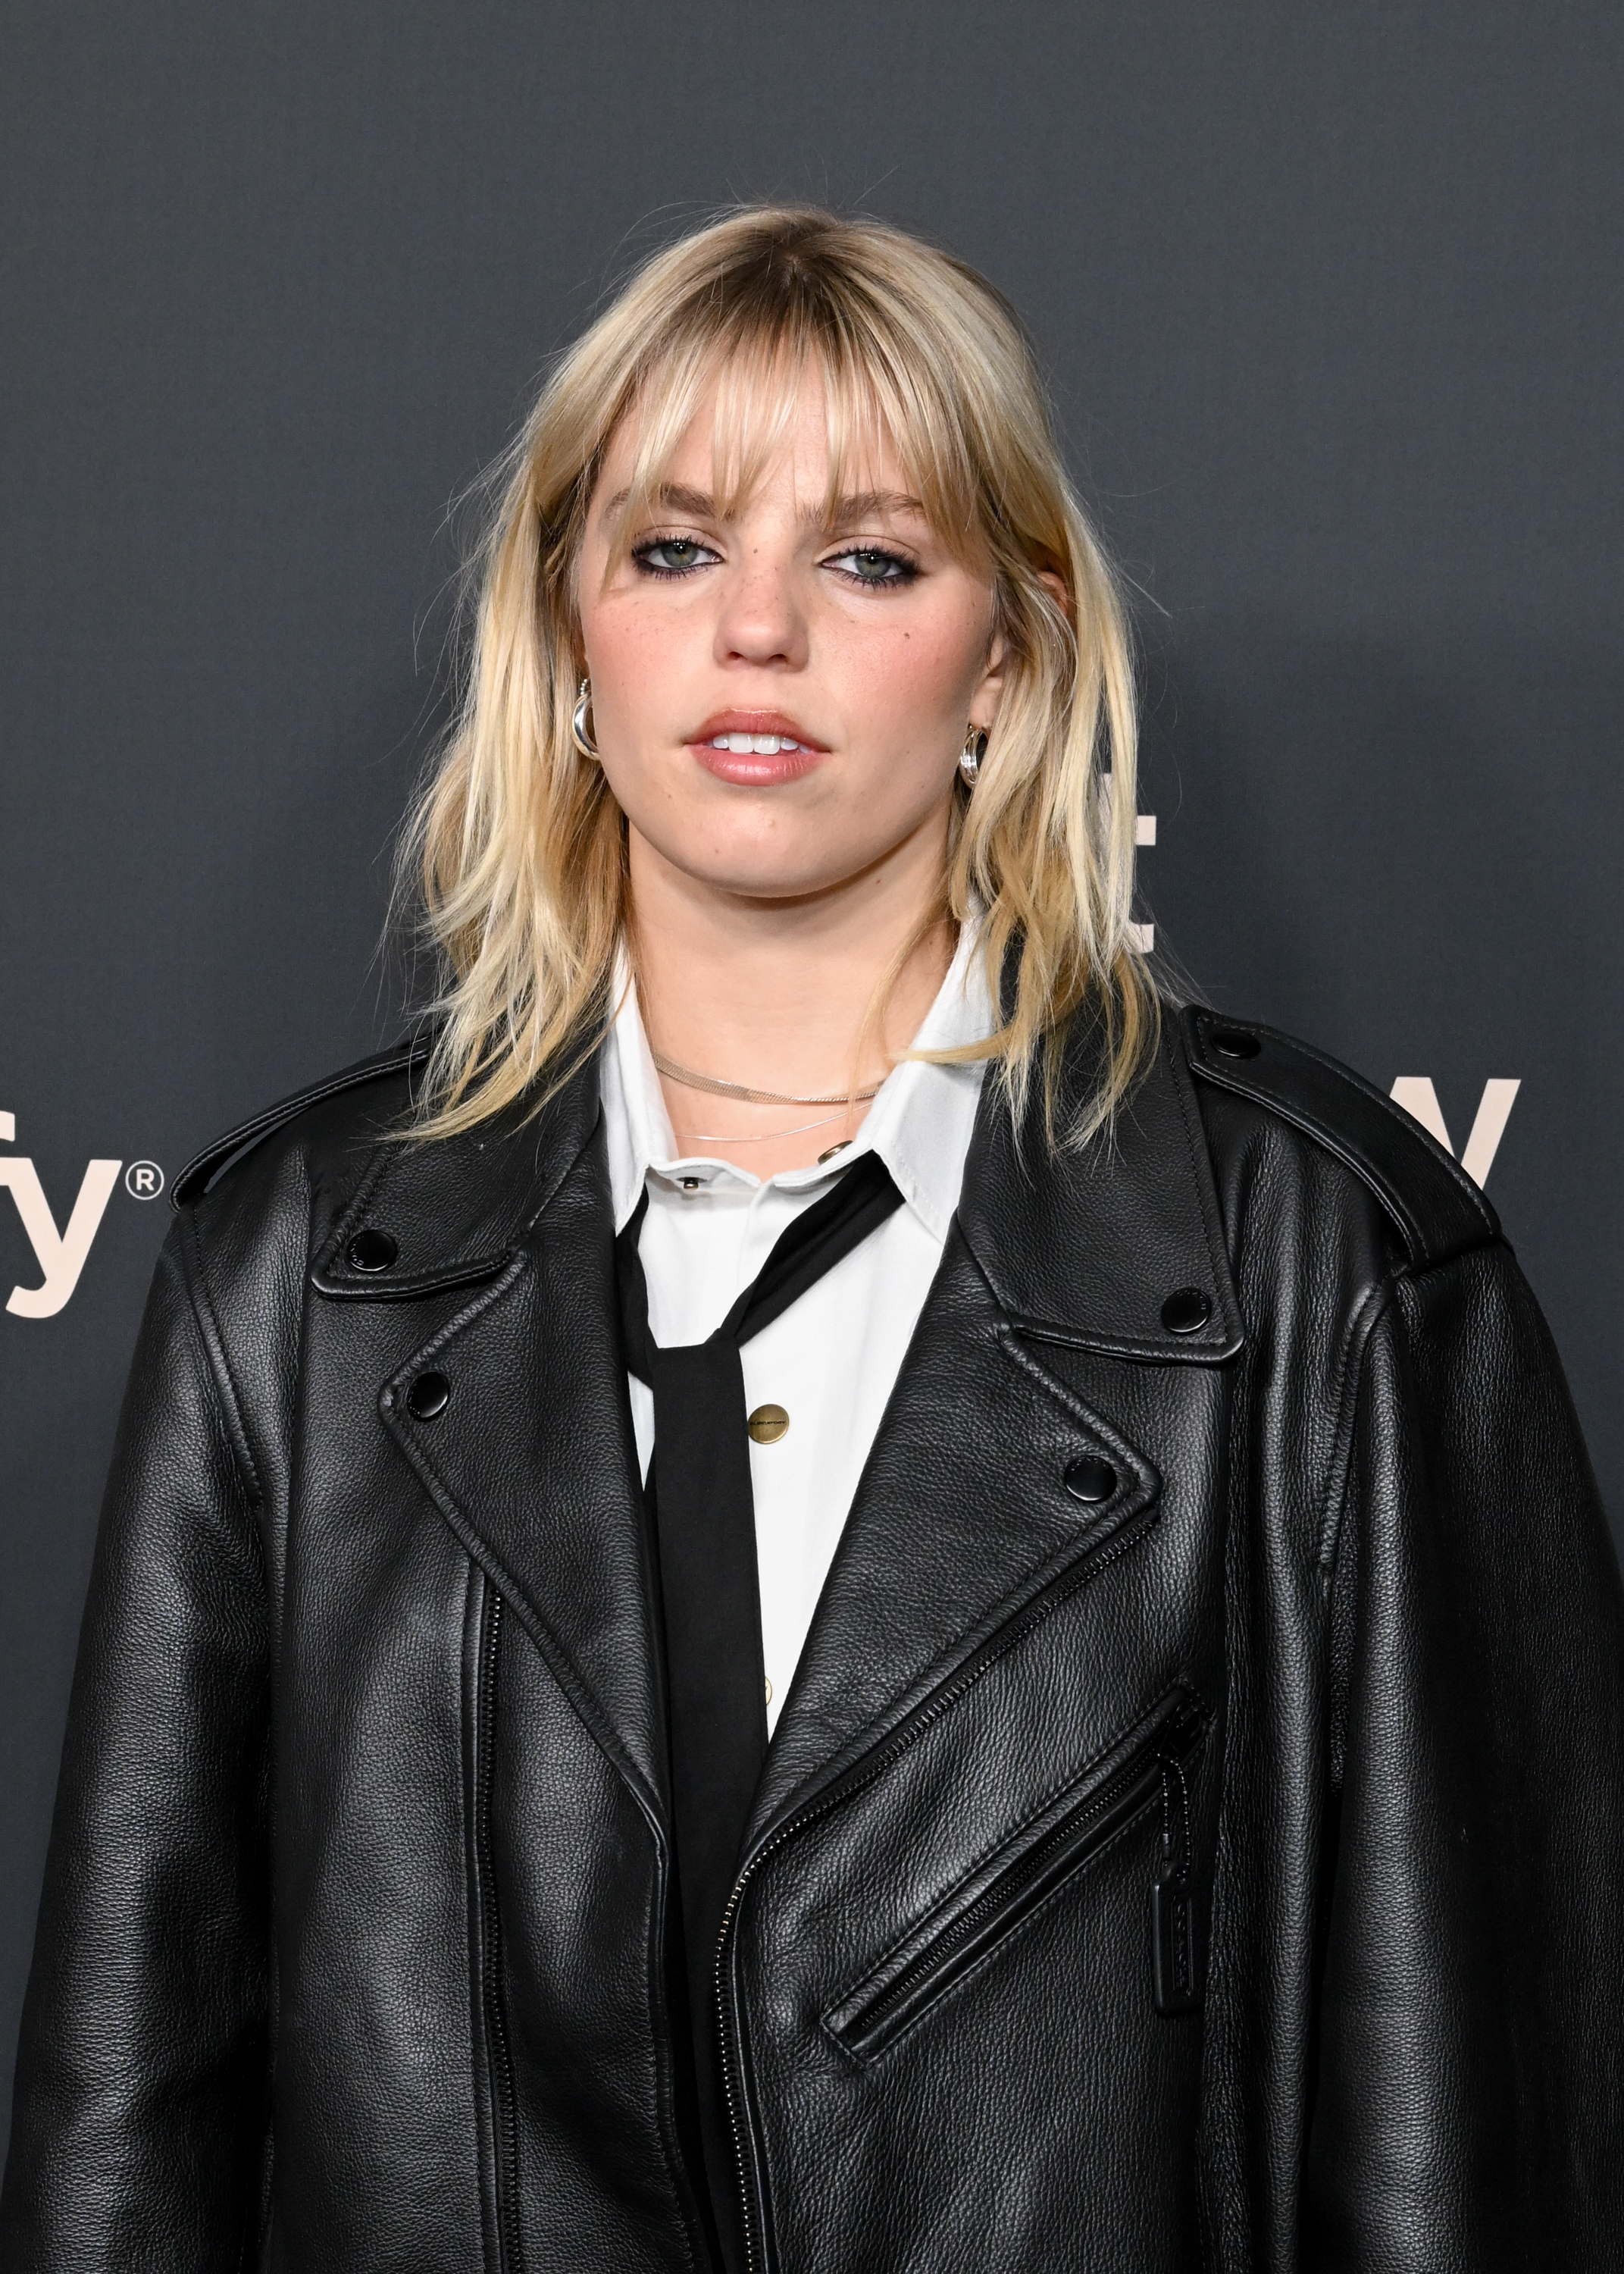 Reneé in a black leather jacket over a white top, attending an event